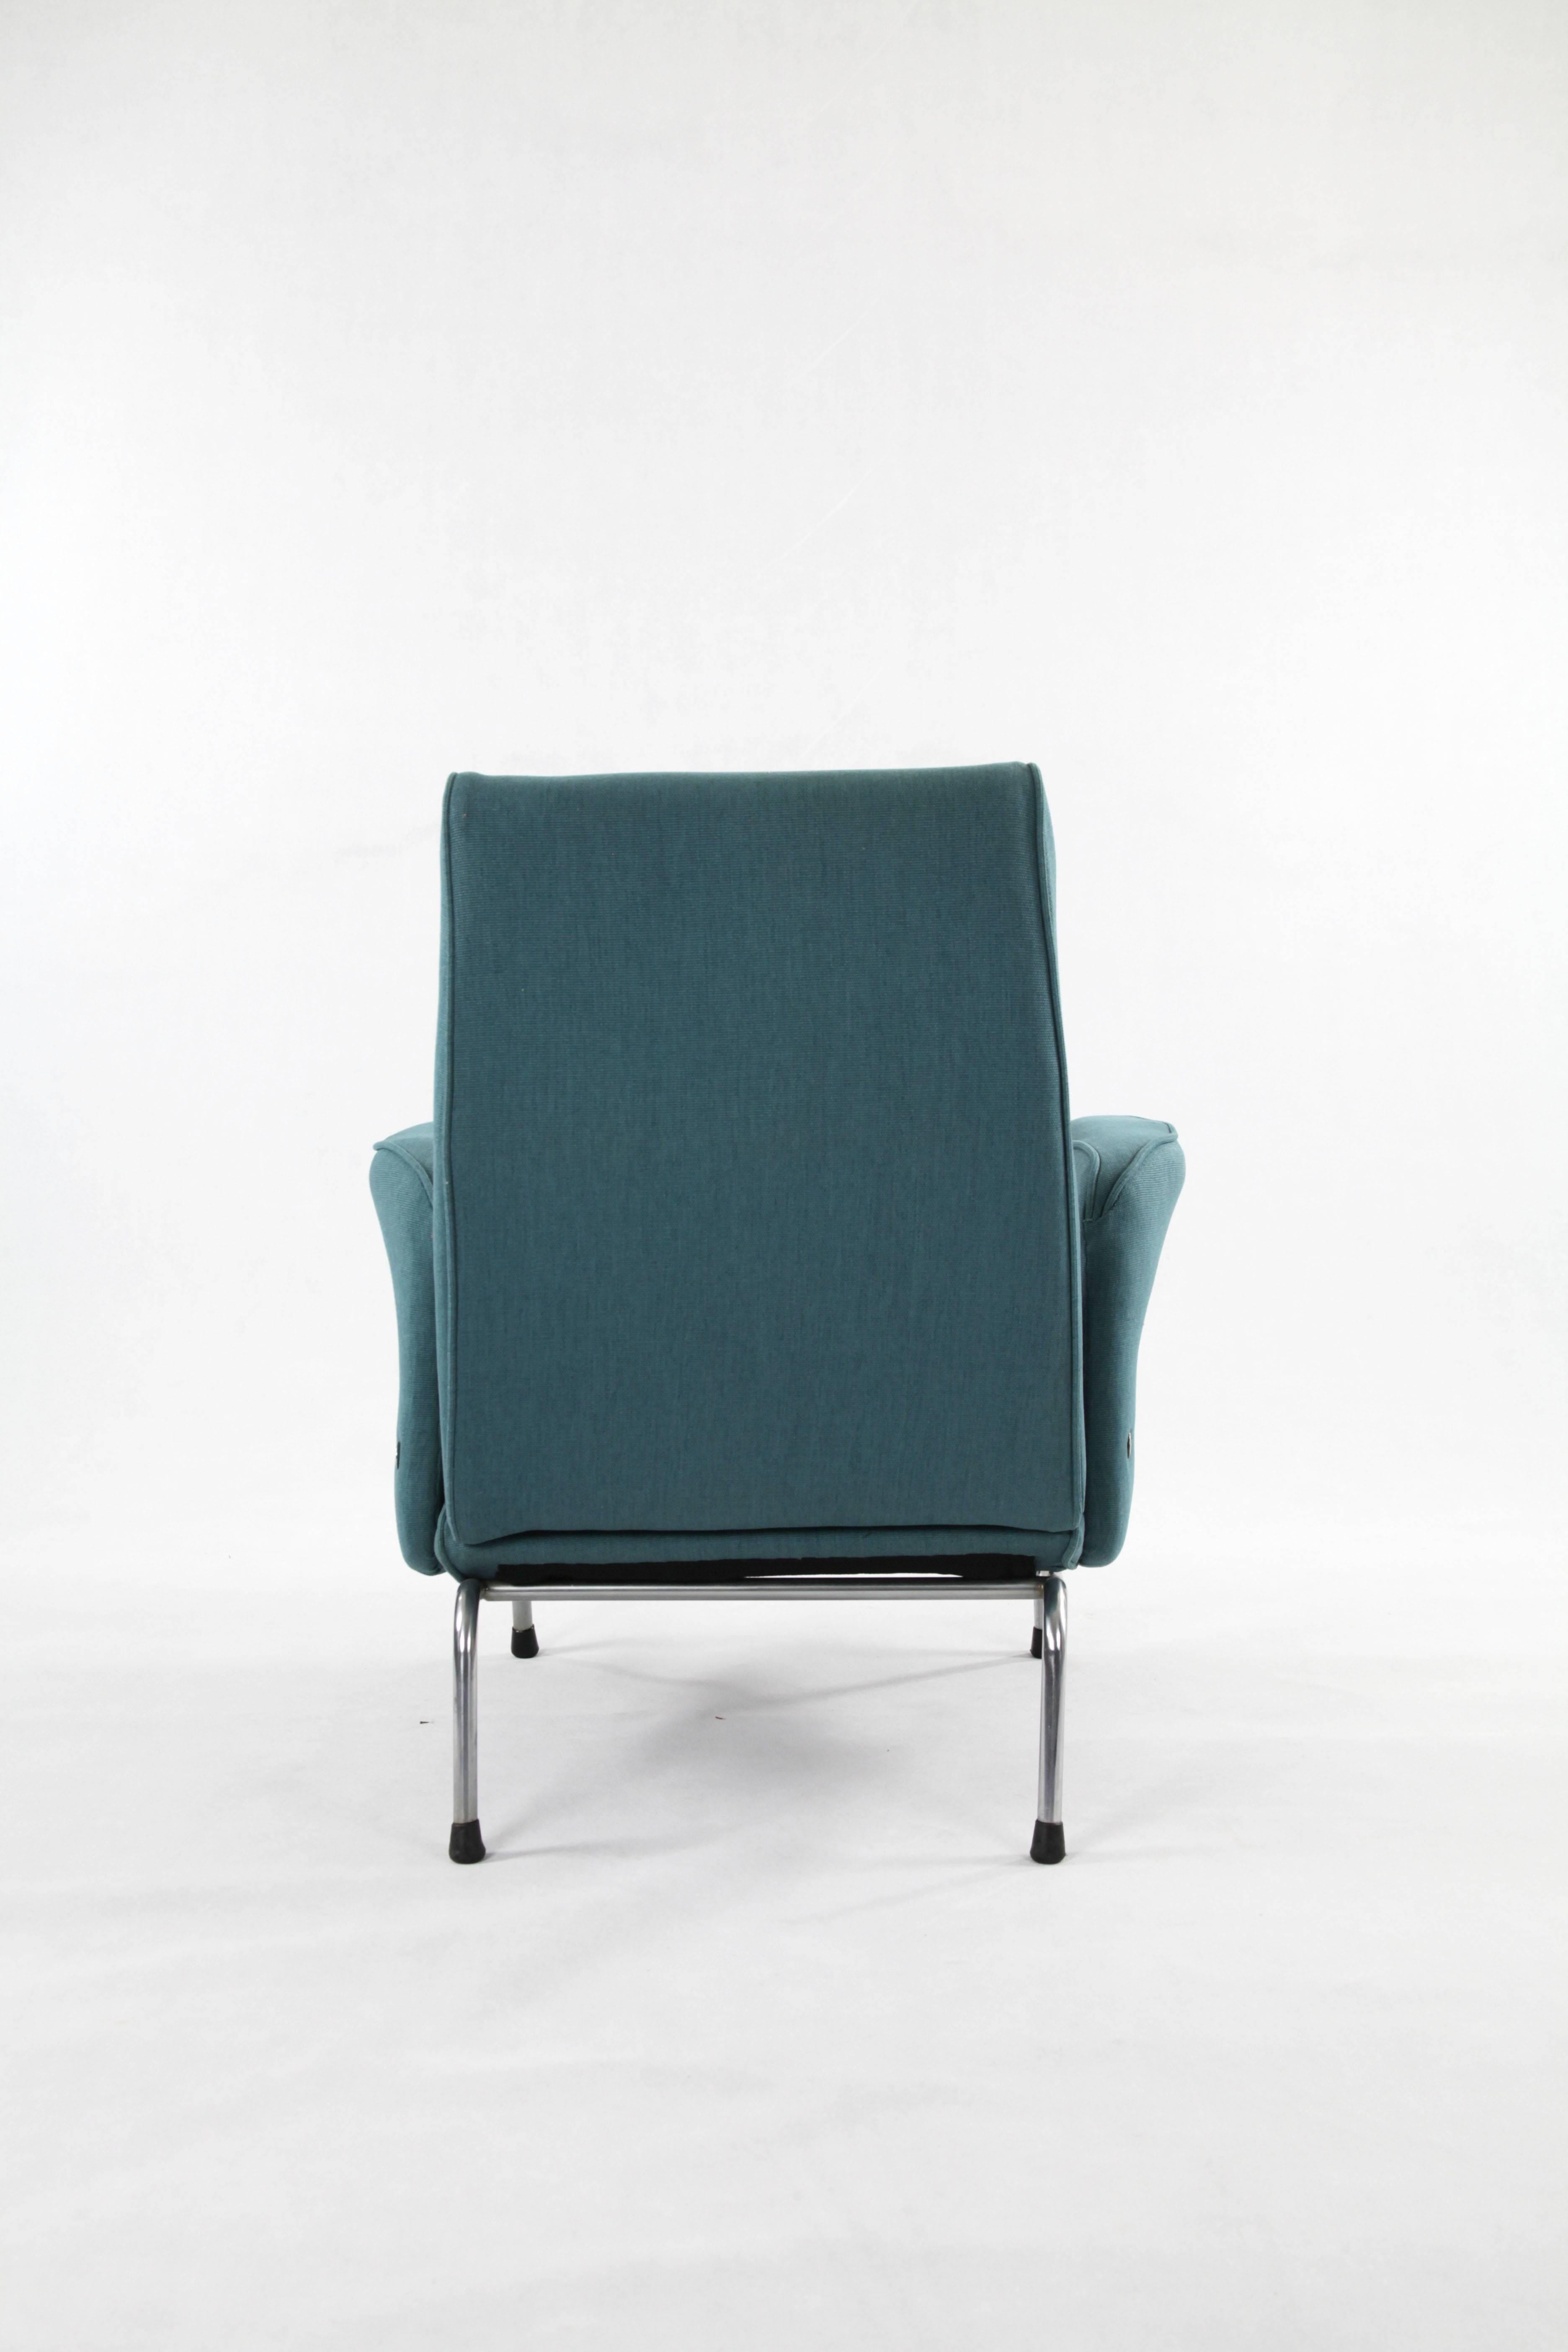 The chair Delfino was designed by Erberto Carboni for Arflex in 1955. The chair is freshly upholstered with light blue fabric and has chrome legs.

Lit: Giuliana Gramigna 